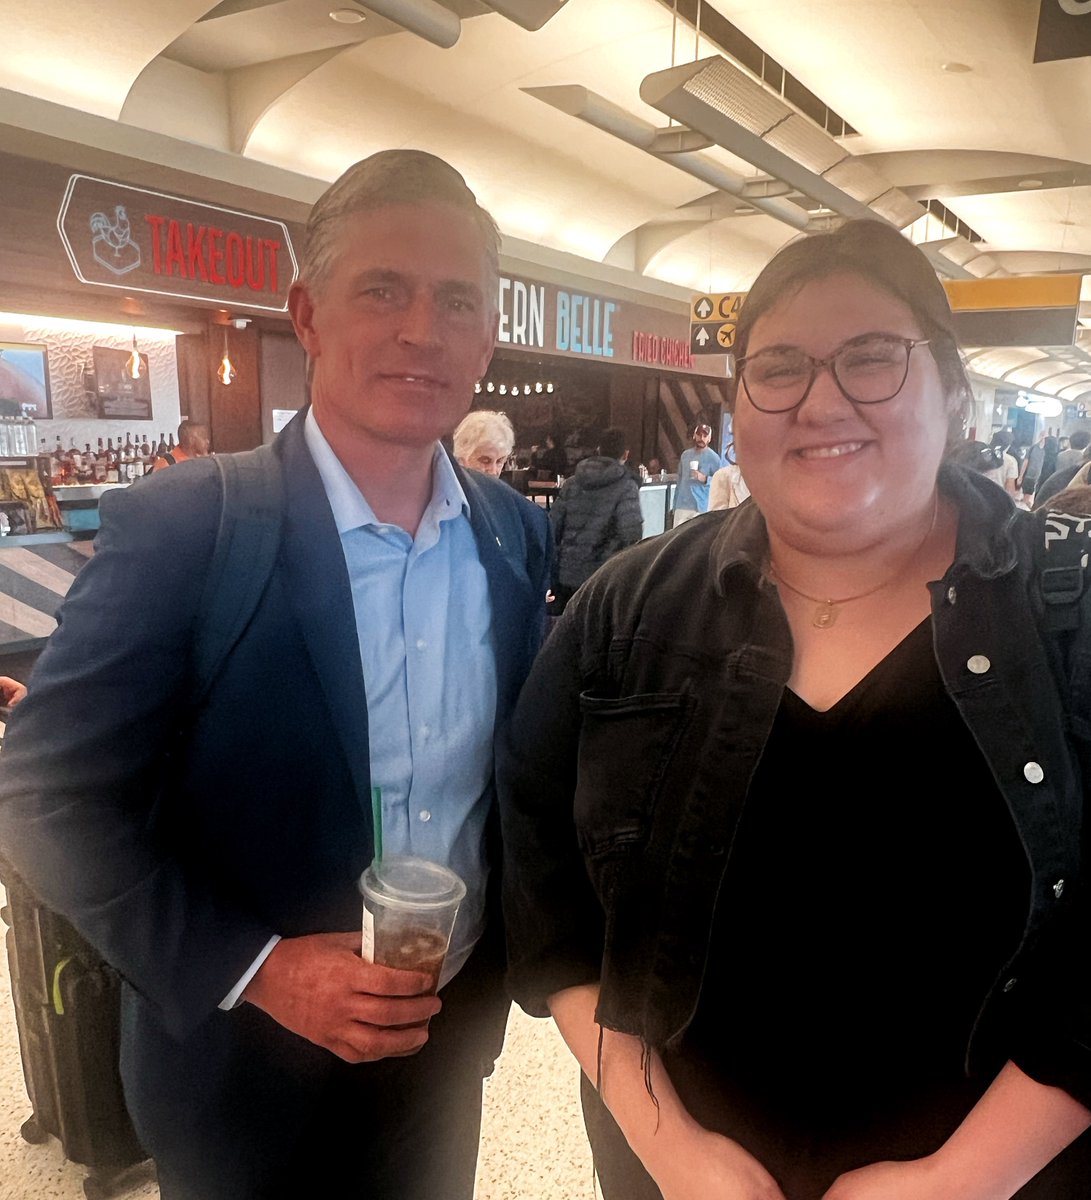 Today I got to meet @SenatorHeinrich at the airport! He chairs a subcommittee that oversees the FDA— and is one of the key legislators fighting to protect access to contraceptives and abortion medication. As a Texan, I thank him!